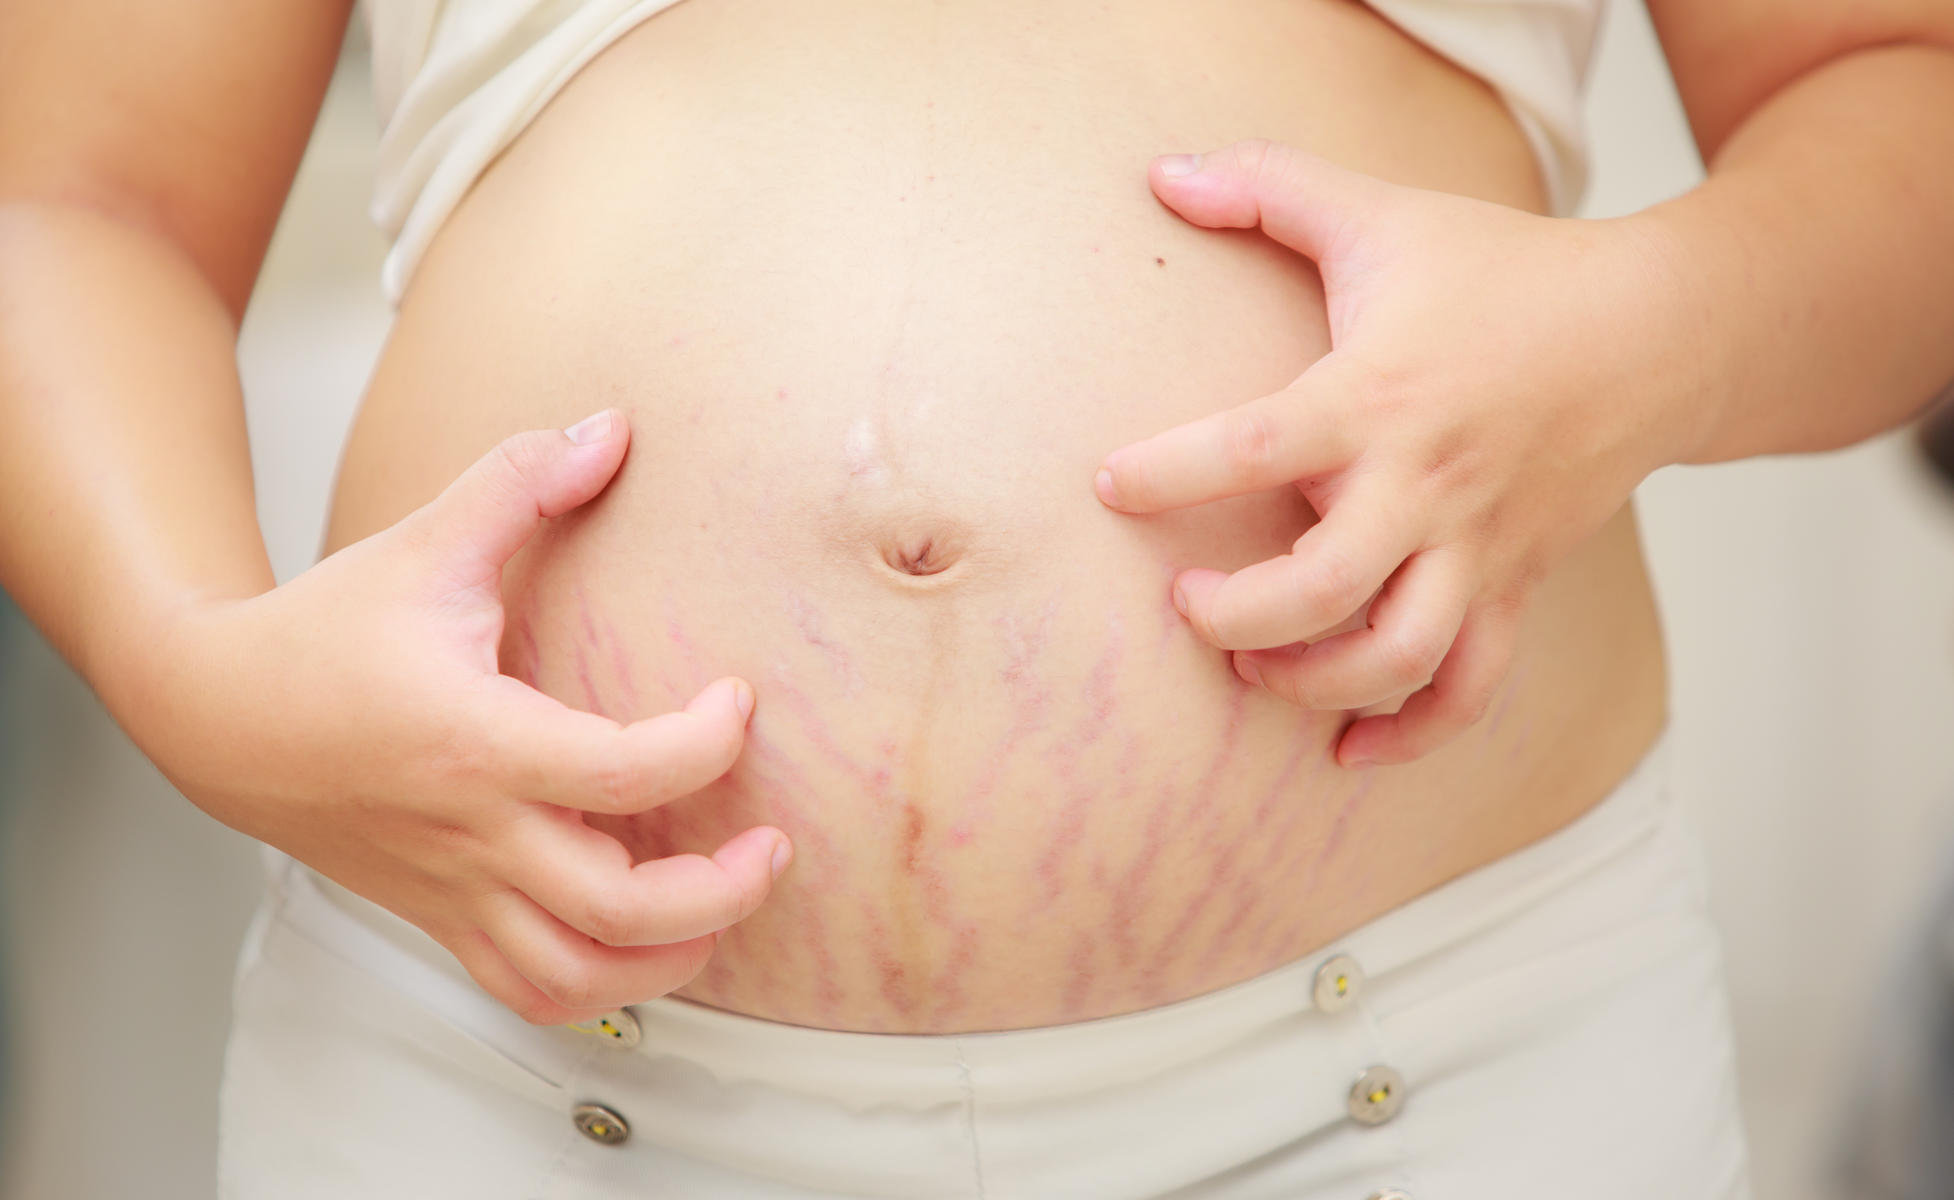 The 4 most visible skin changes during pregnancy #2